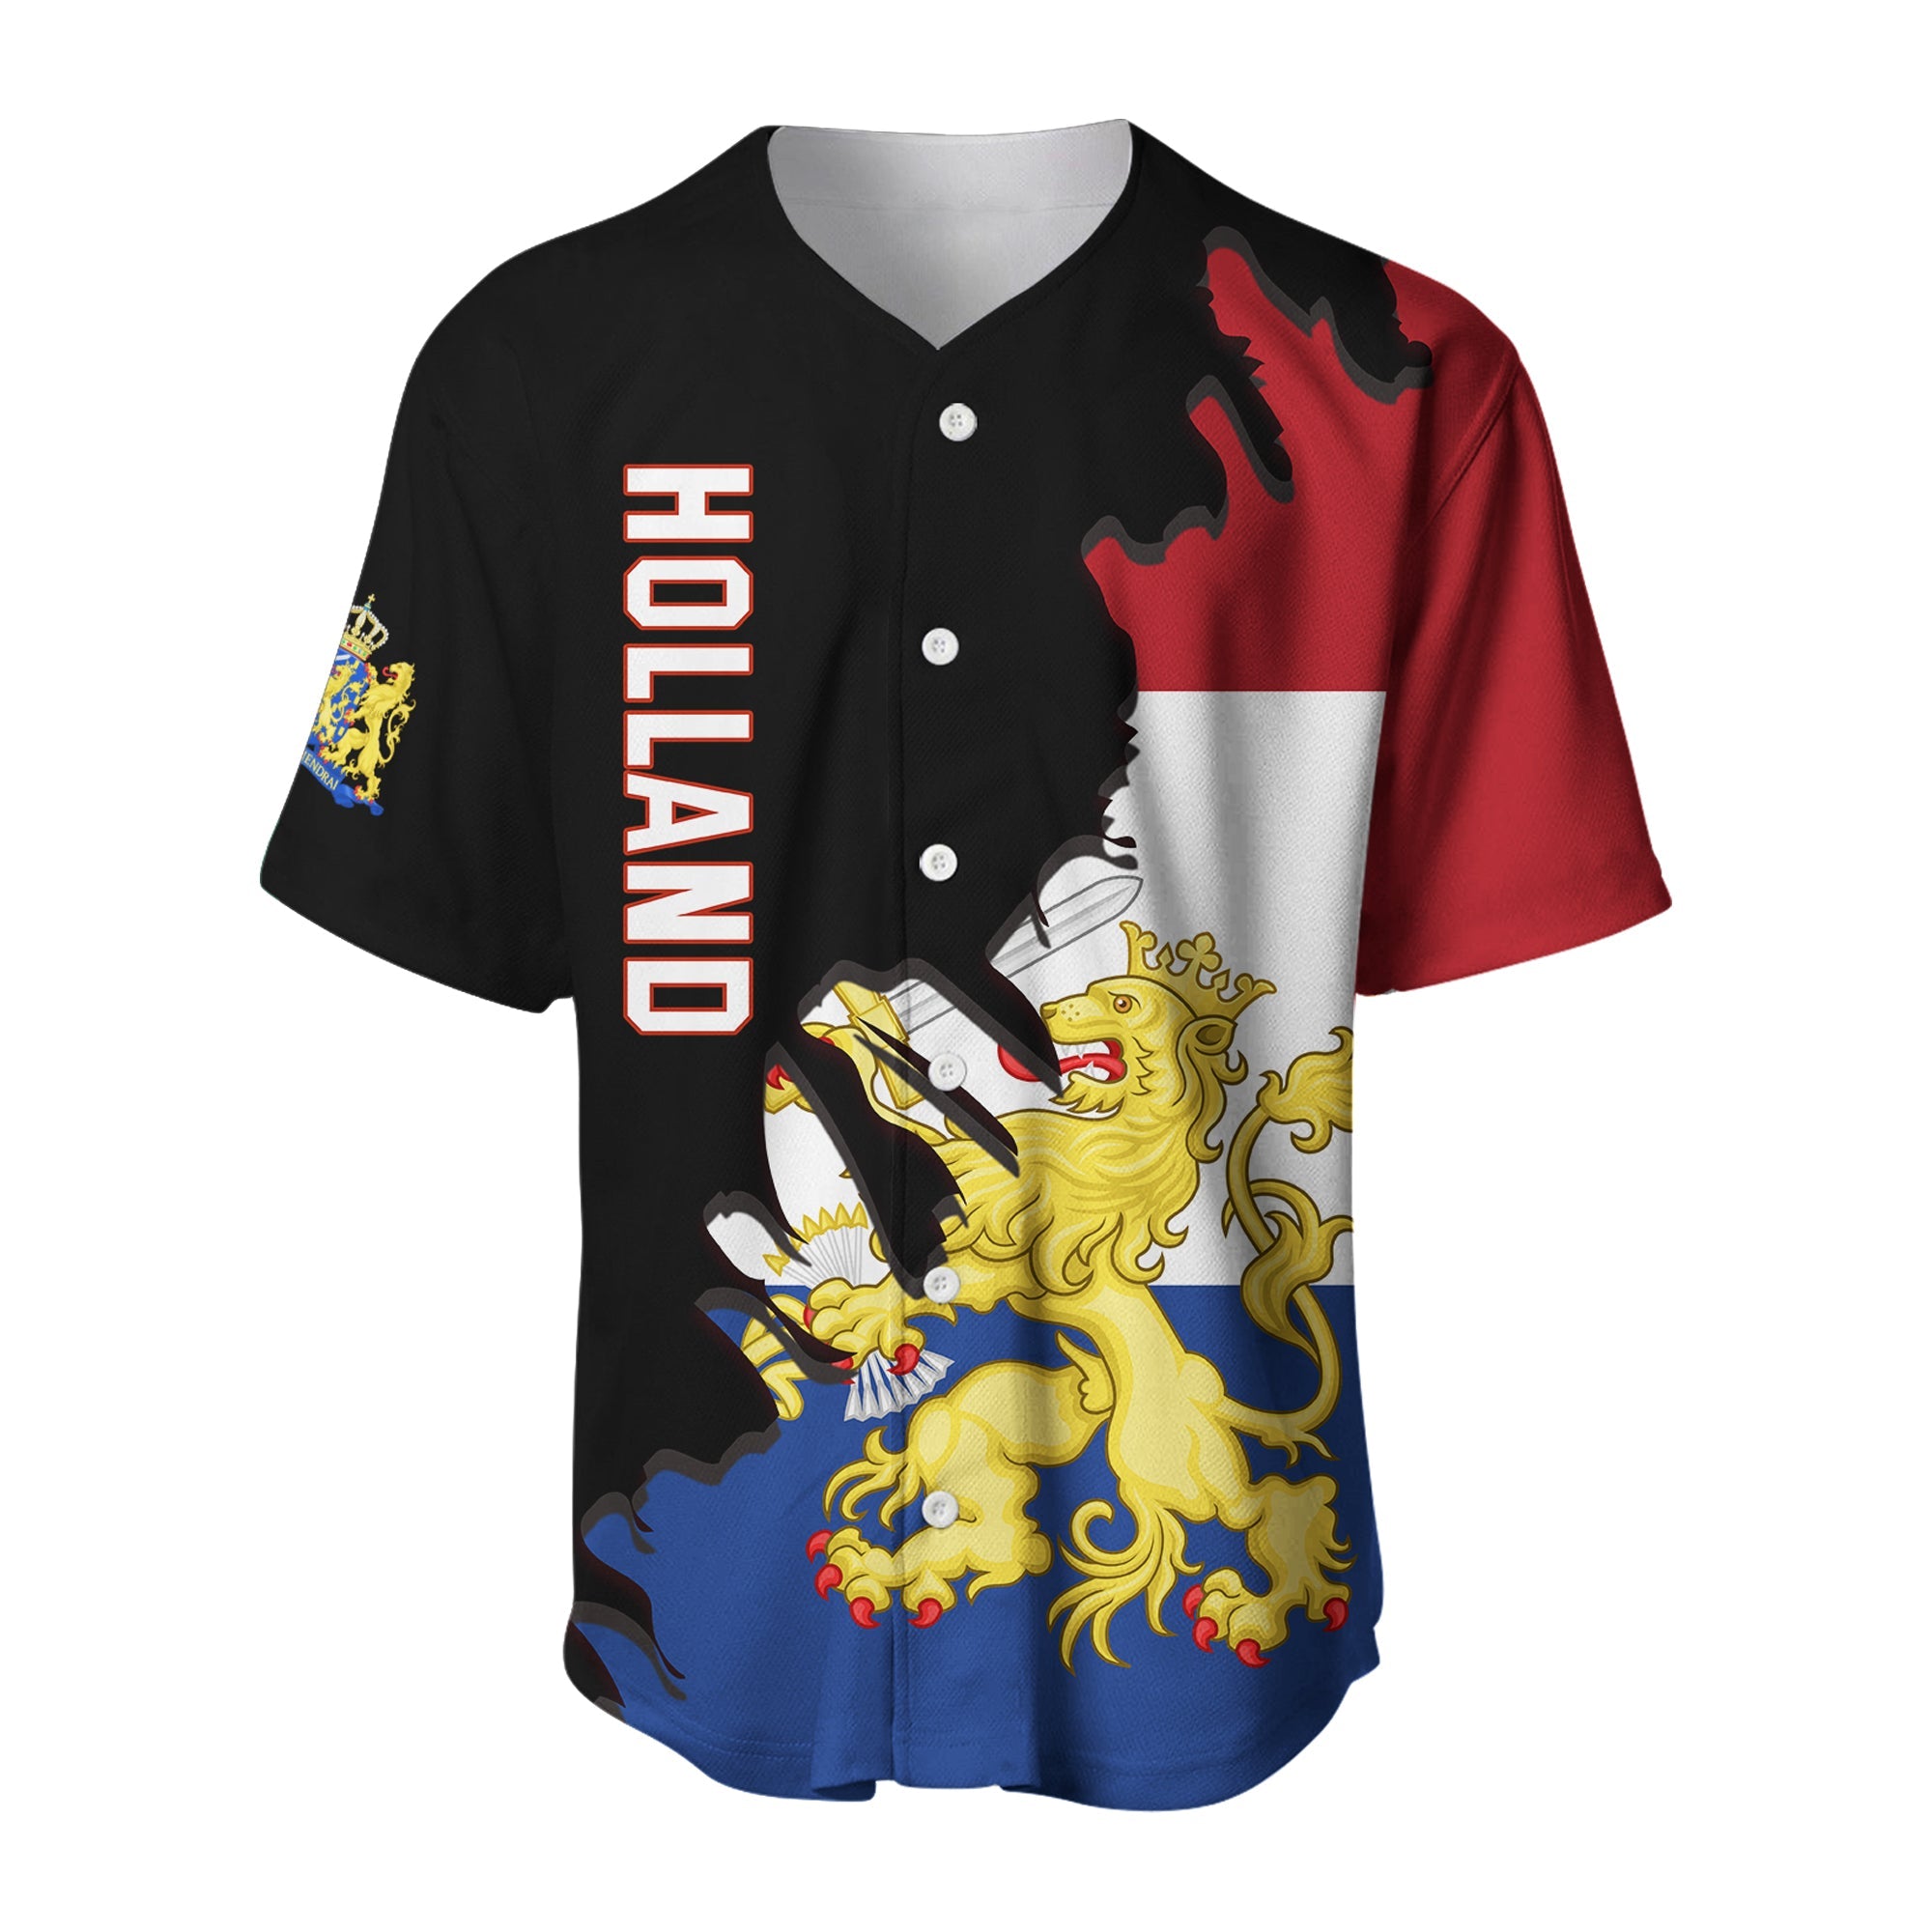 netherlands-baseball-jersey-style-flag-and-map-holland